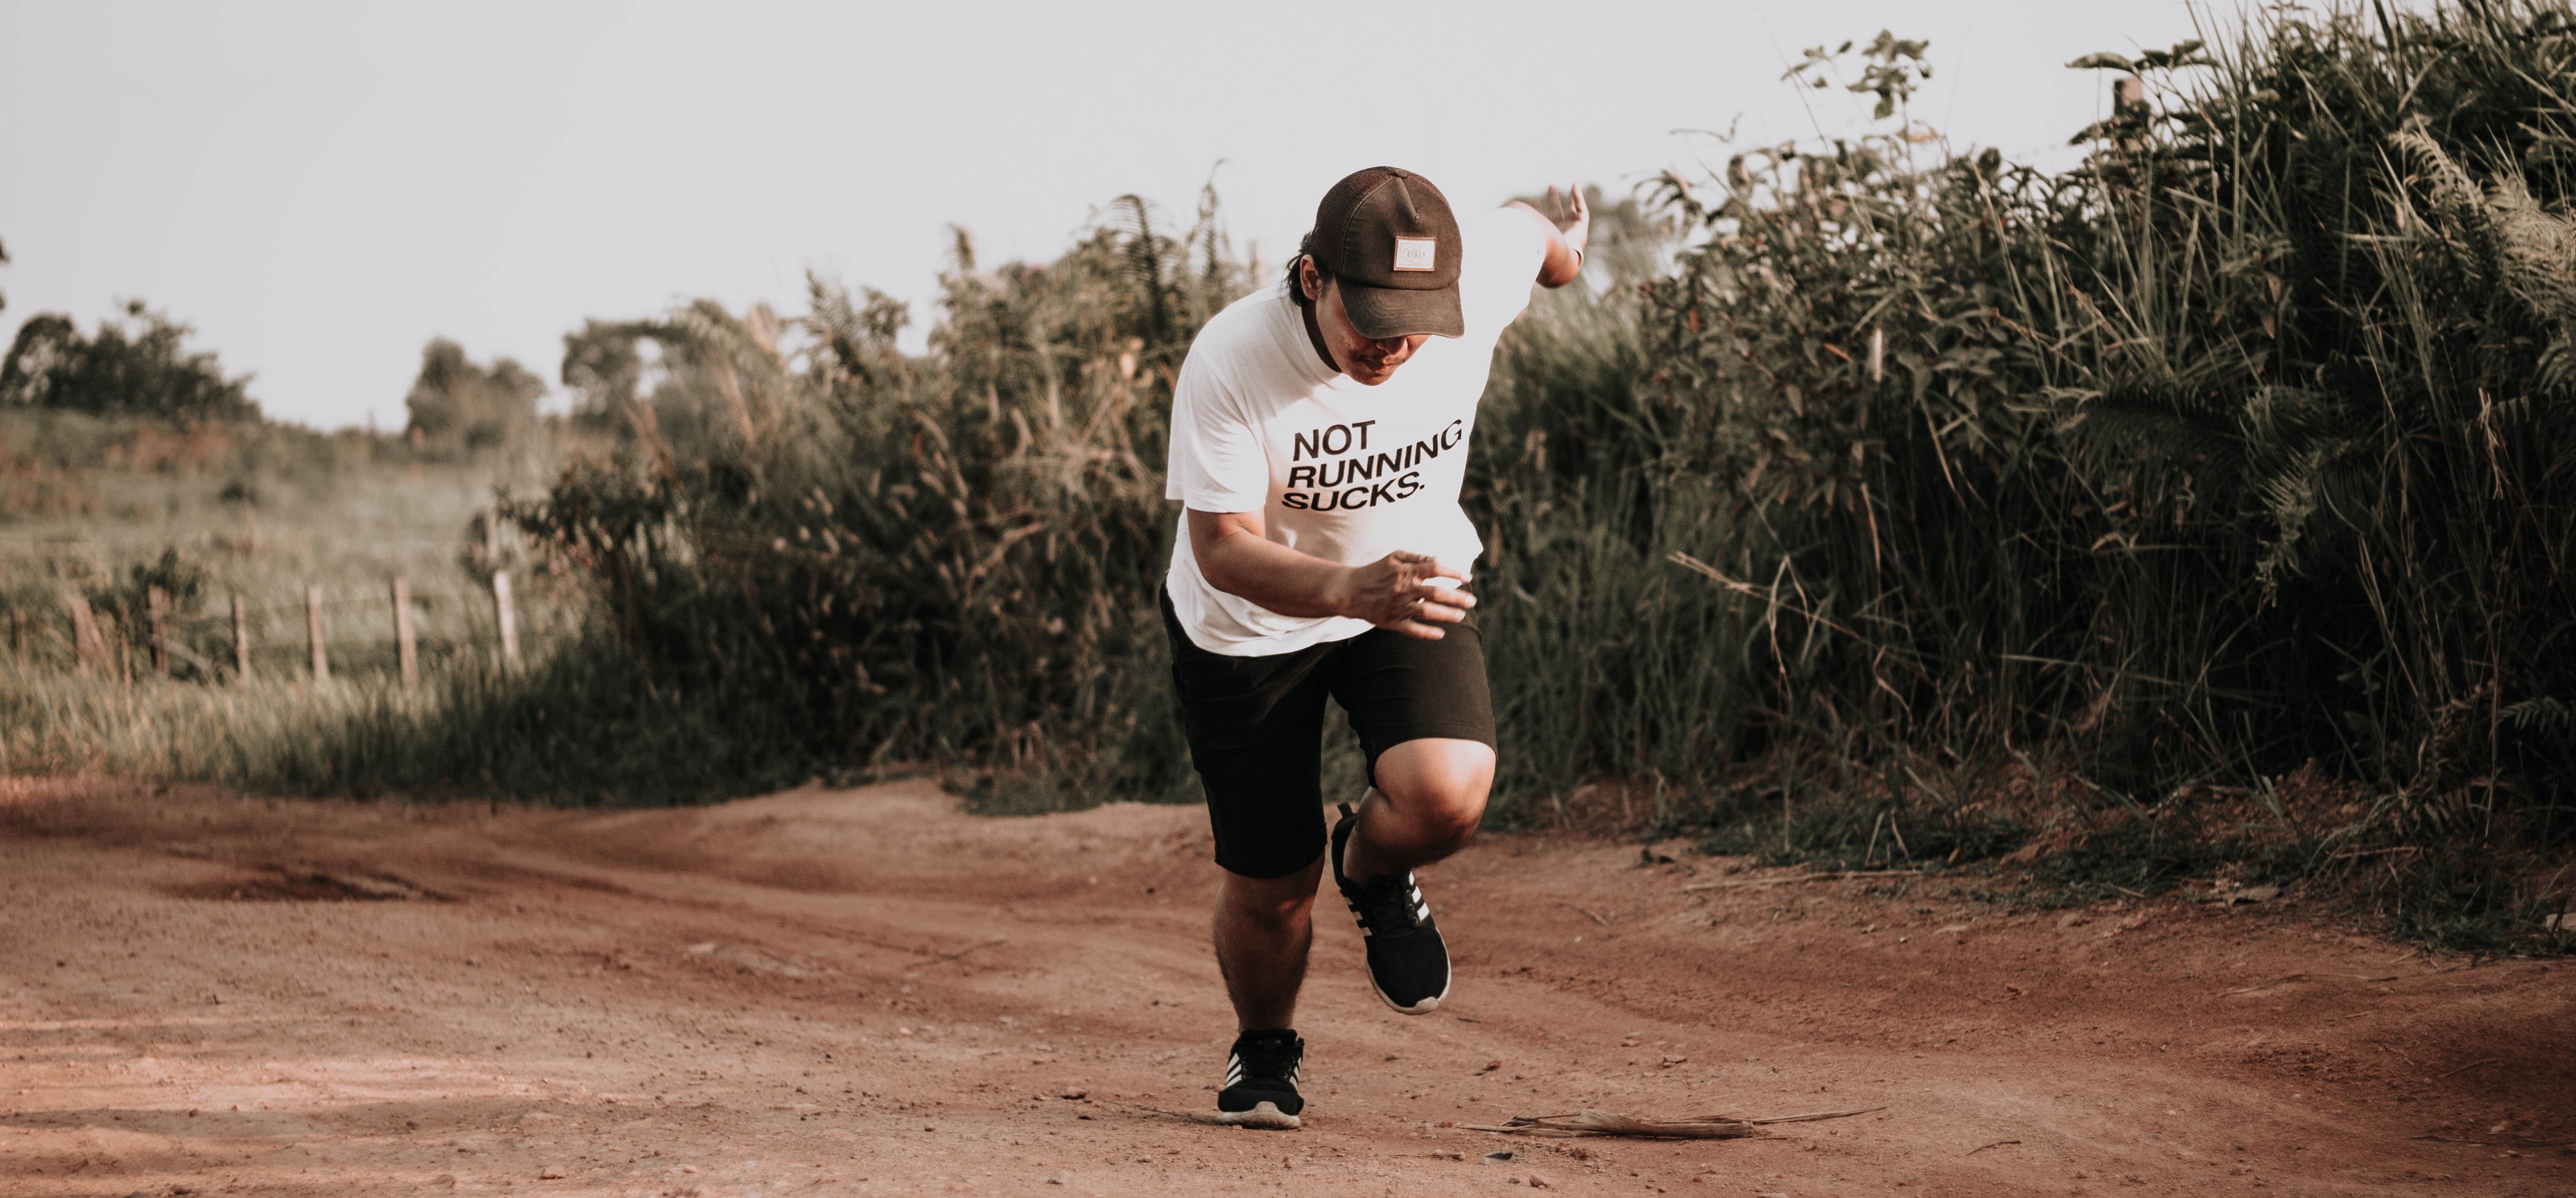 As we'll discover, running on a dirt road could actually be ideal for a running practice.